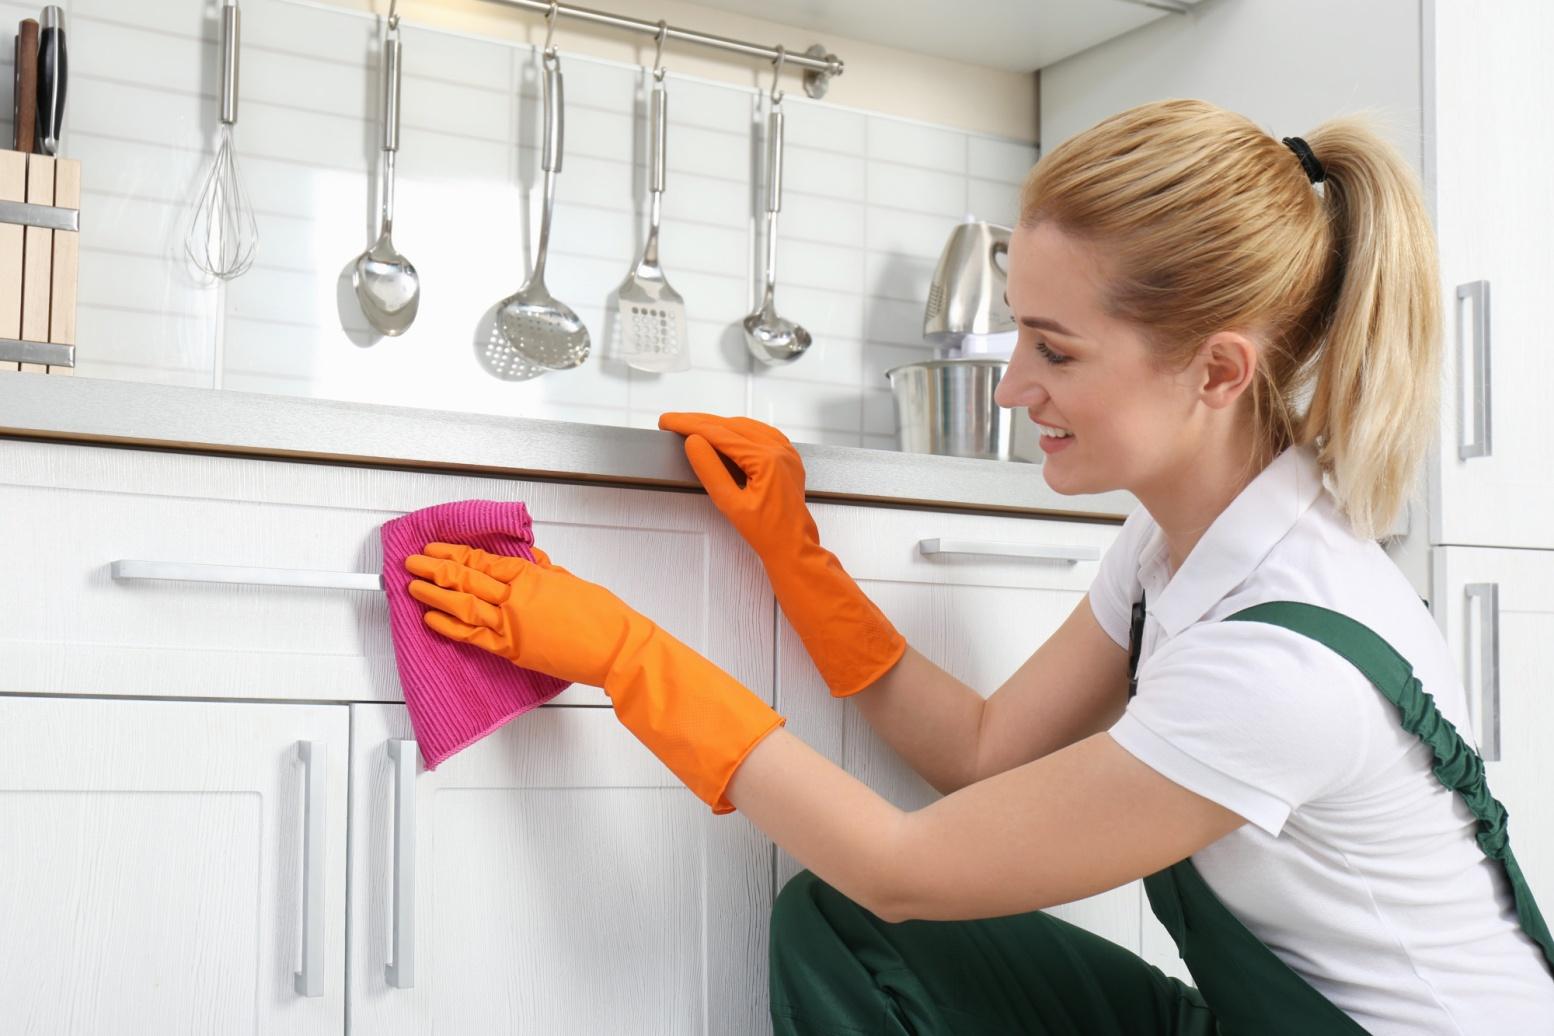 Kitchen Cleaning: How to Deep Clean Your Kitchen Appliances |